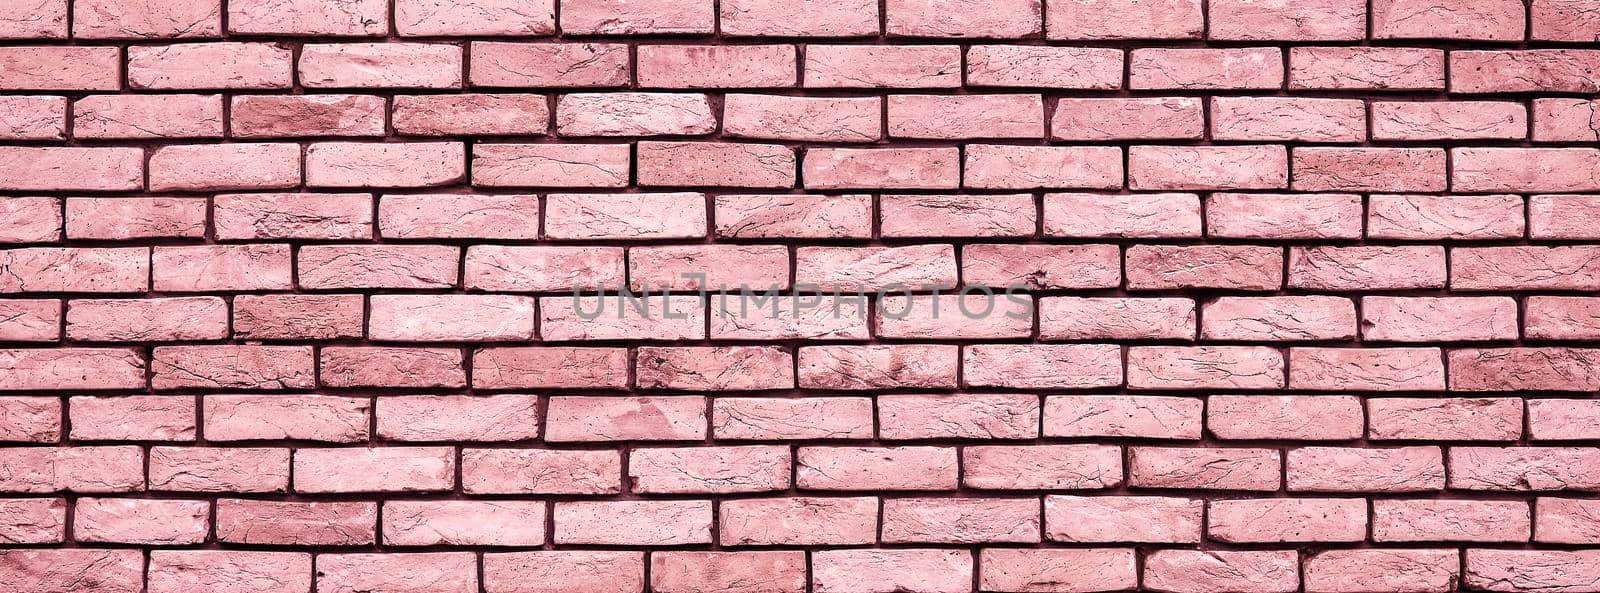 Coral Brick wall texture close up. Top view. Modern brick wall wallpaper design for web or graphic art projects. Abstract background for business cards and covers. Template or mock up.